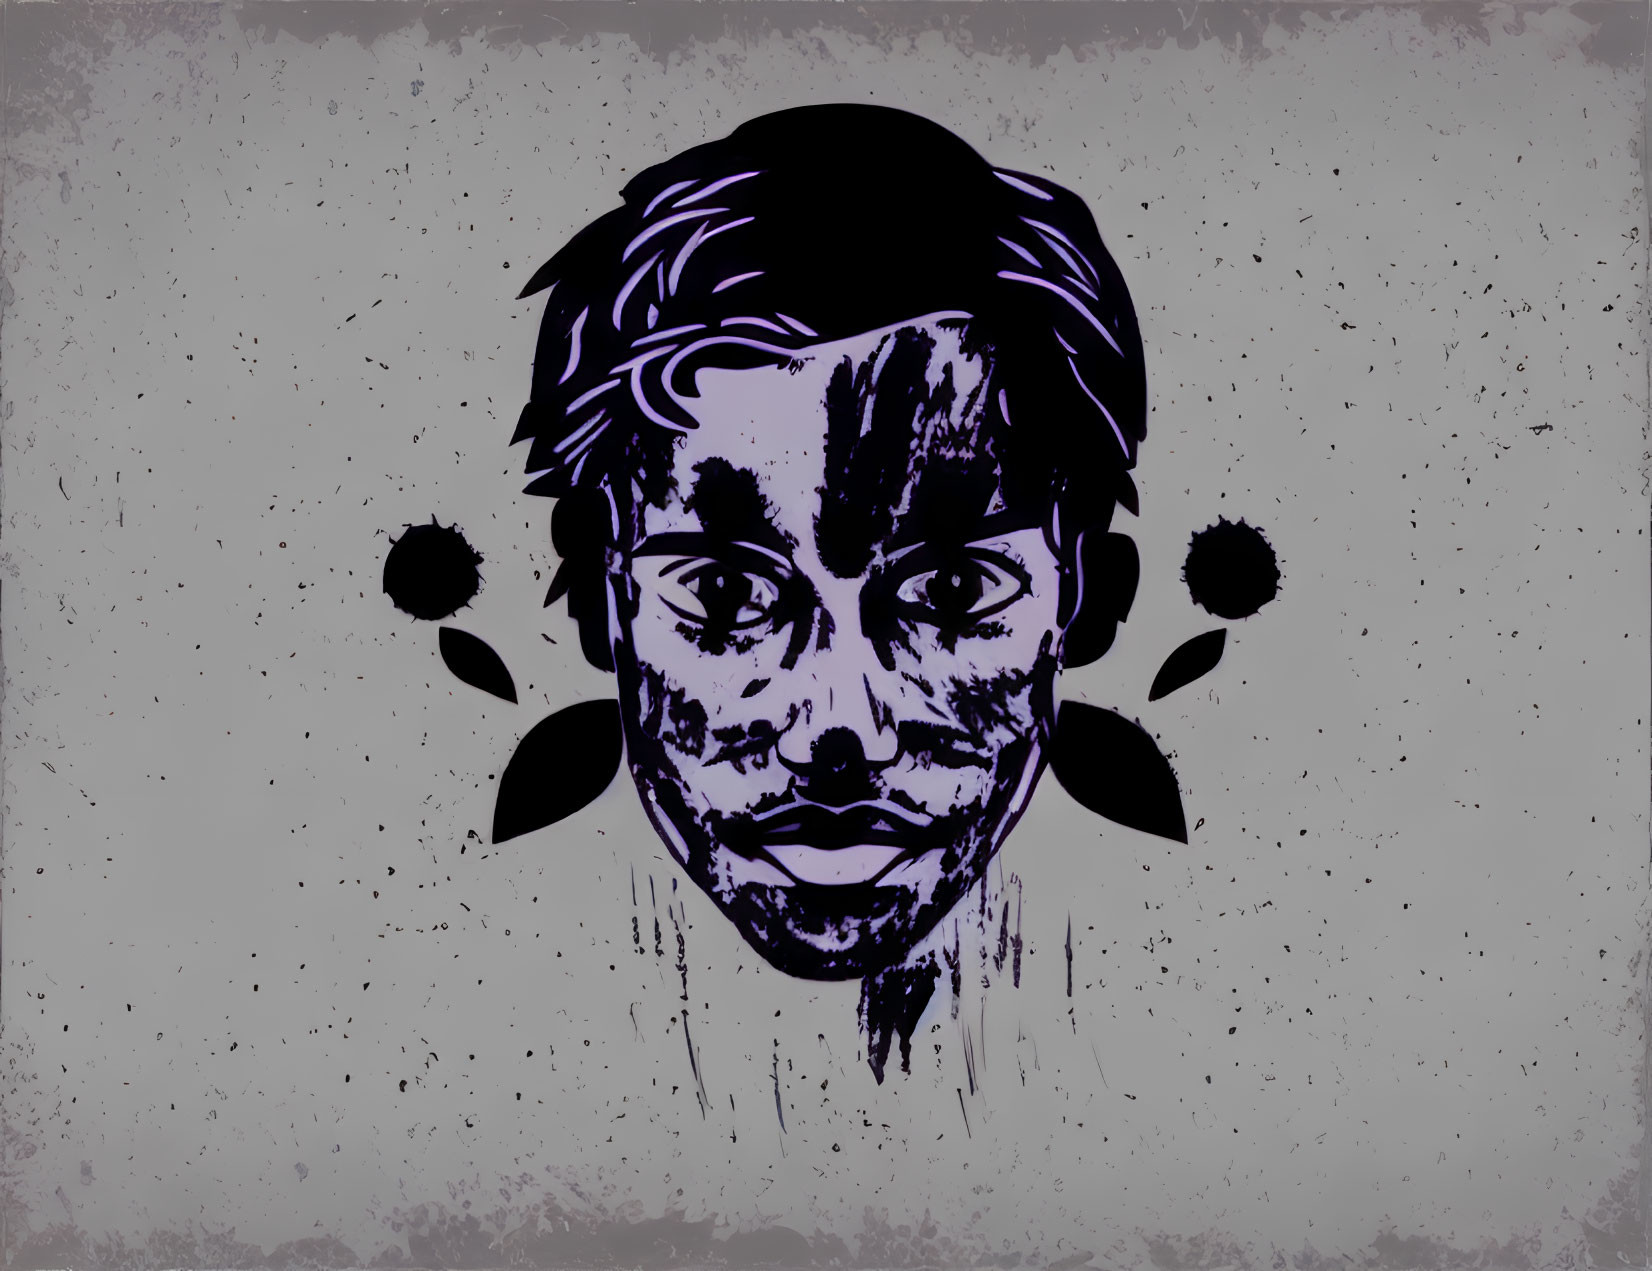 Stylized purple and black face graphic on textured grey background